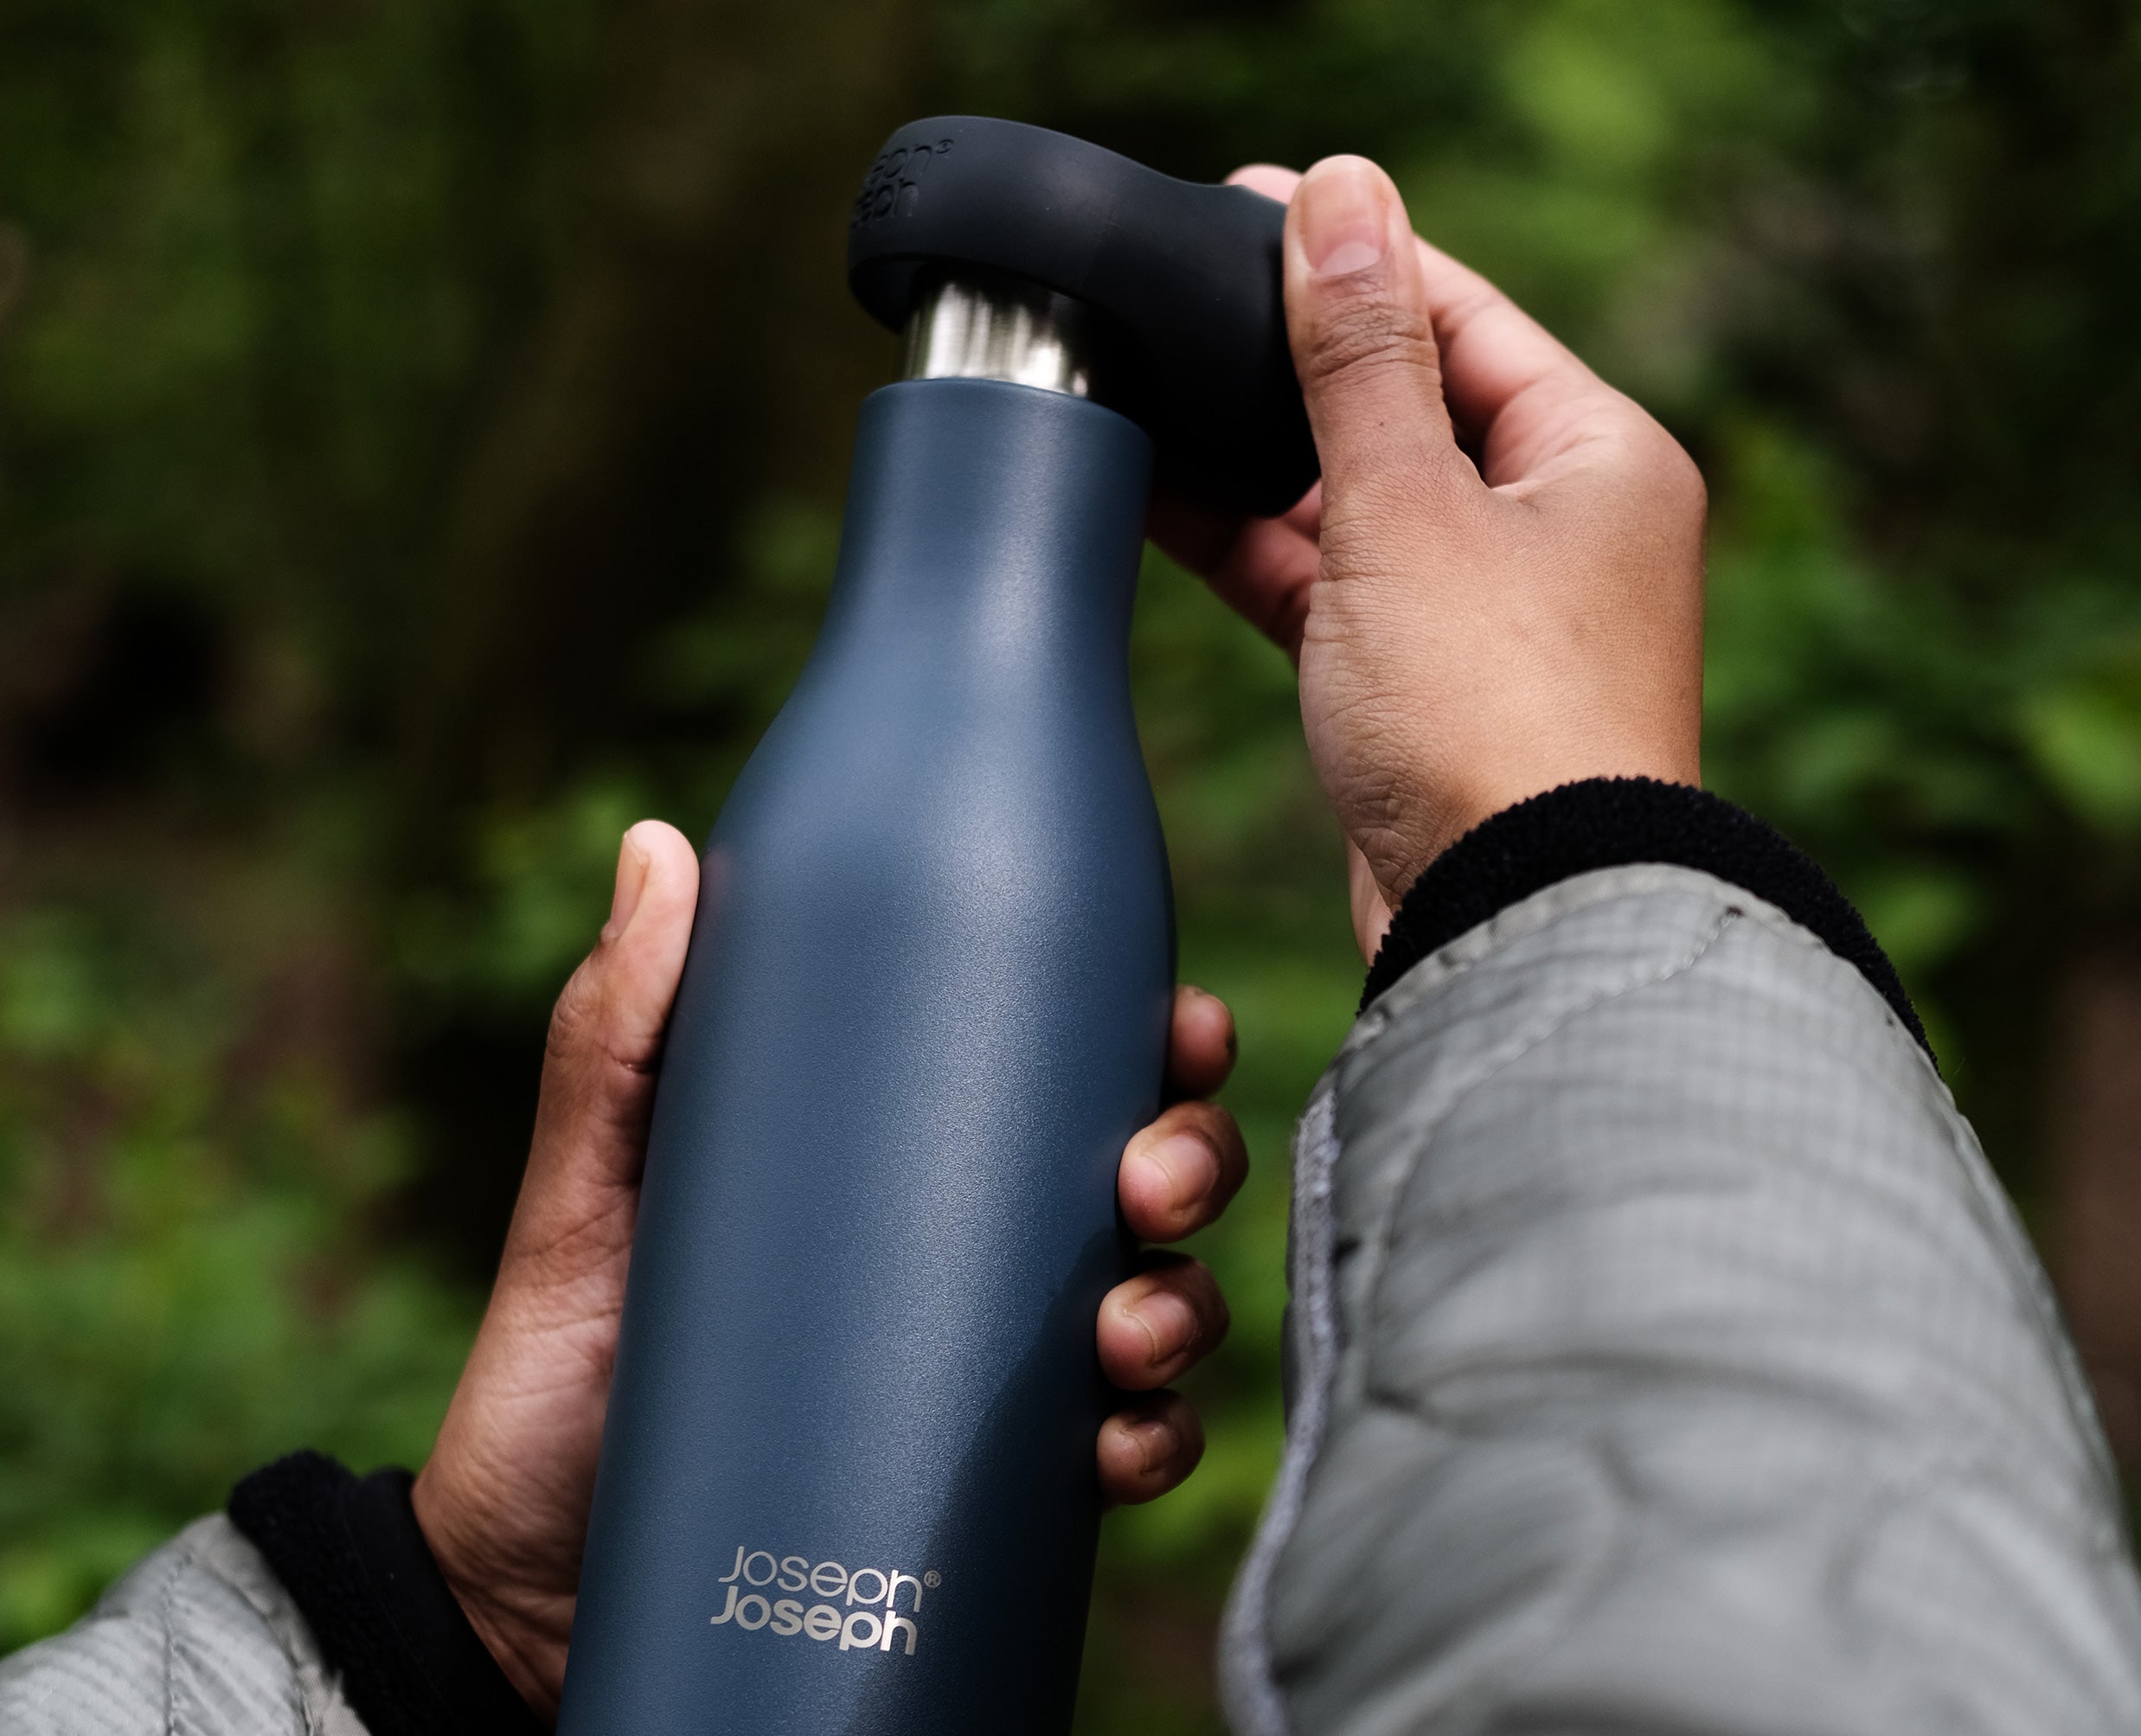 BEON.COM.AU Product Details The clever design of this water bottle keeps drinks hot for up to 12 hours, cold for up to 24 hours and remains condensation-free in your bag thanks to the double-walled, vacuum-insulated 18/8 stainless steel with a heat-reflecting copper layer.  Lid stores neatly on neck of bottl... Joseph Joseph at BEON.COM.AU